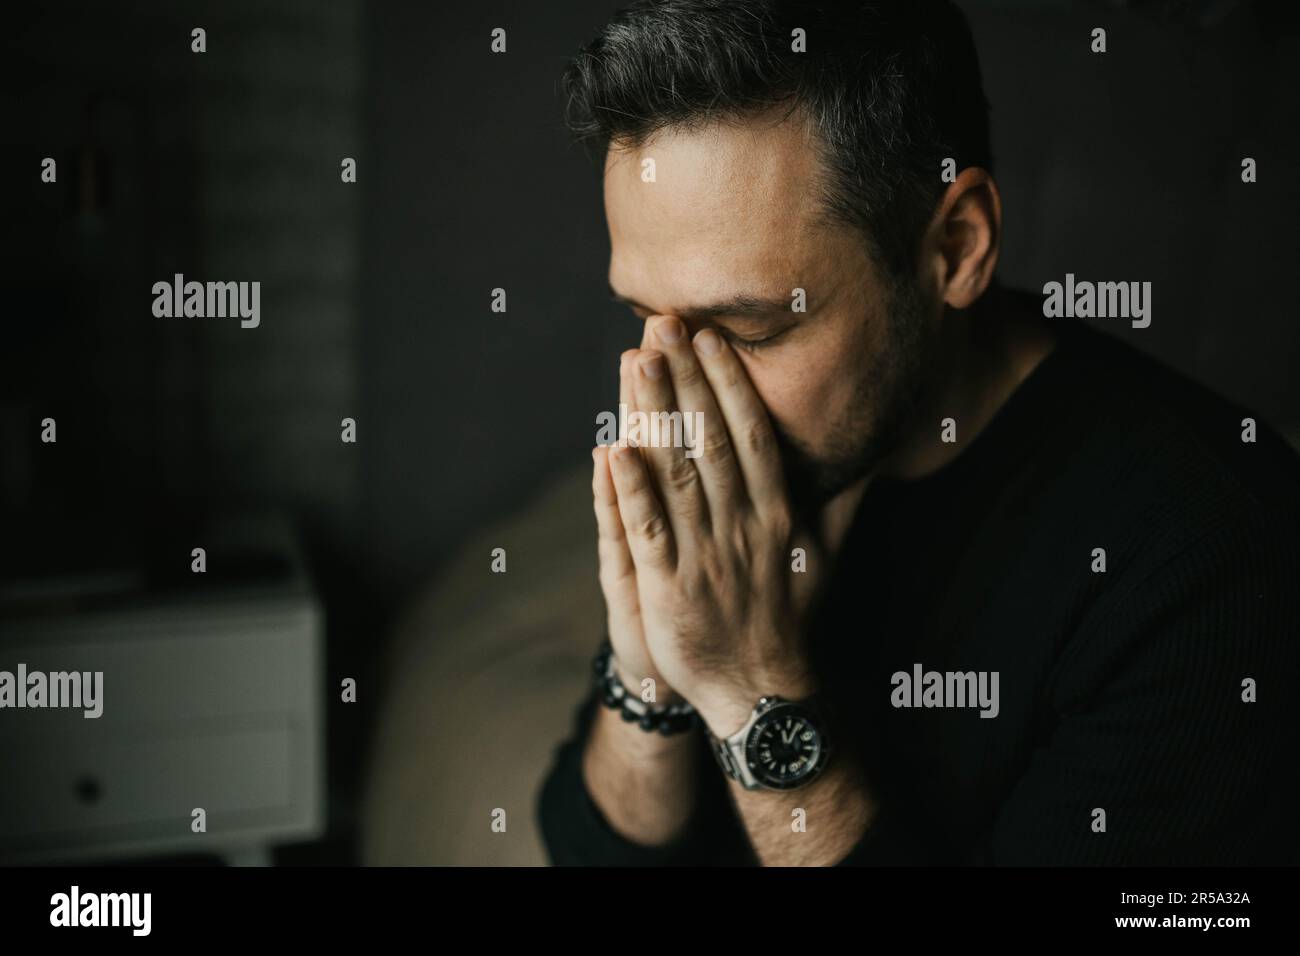 Sad man put his hands to his face sitting on the bed Stock Photo